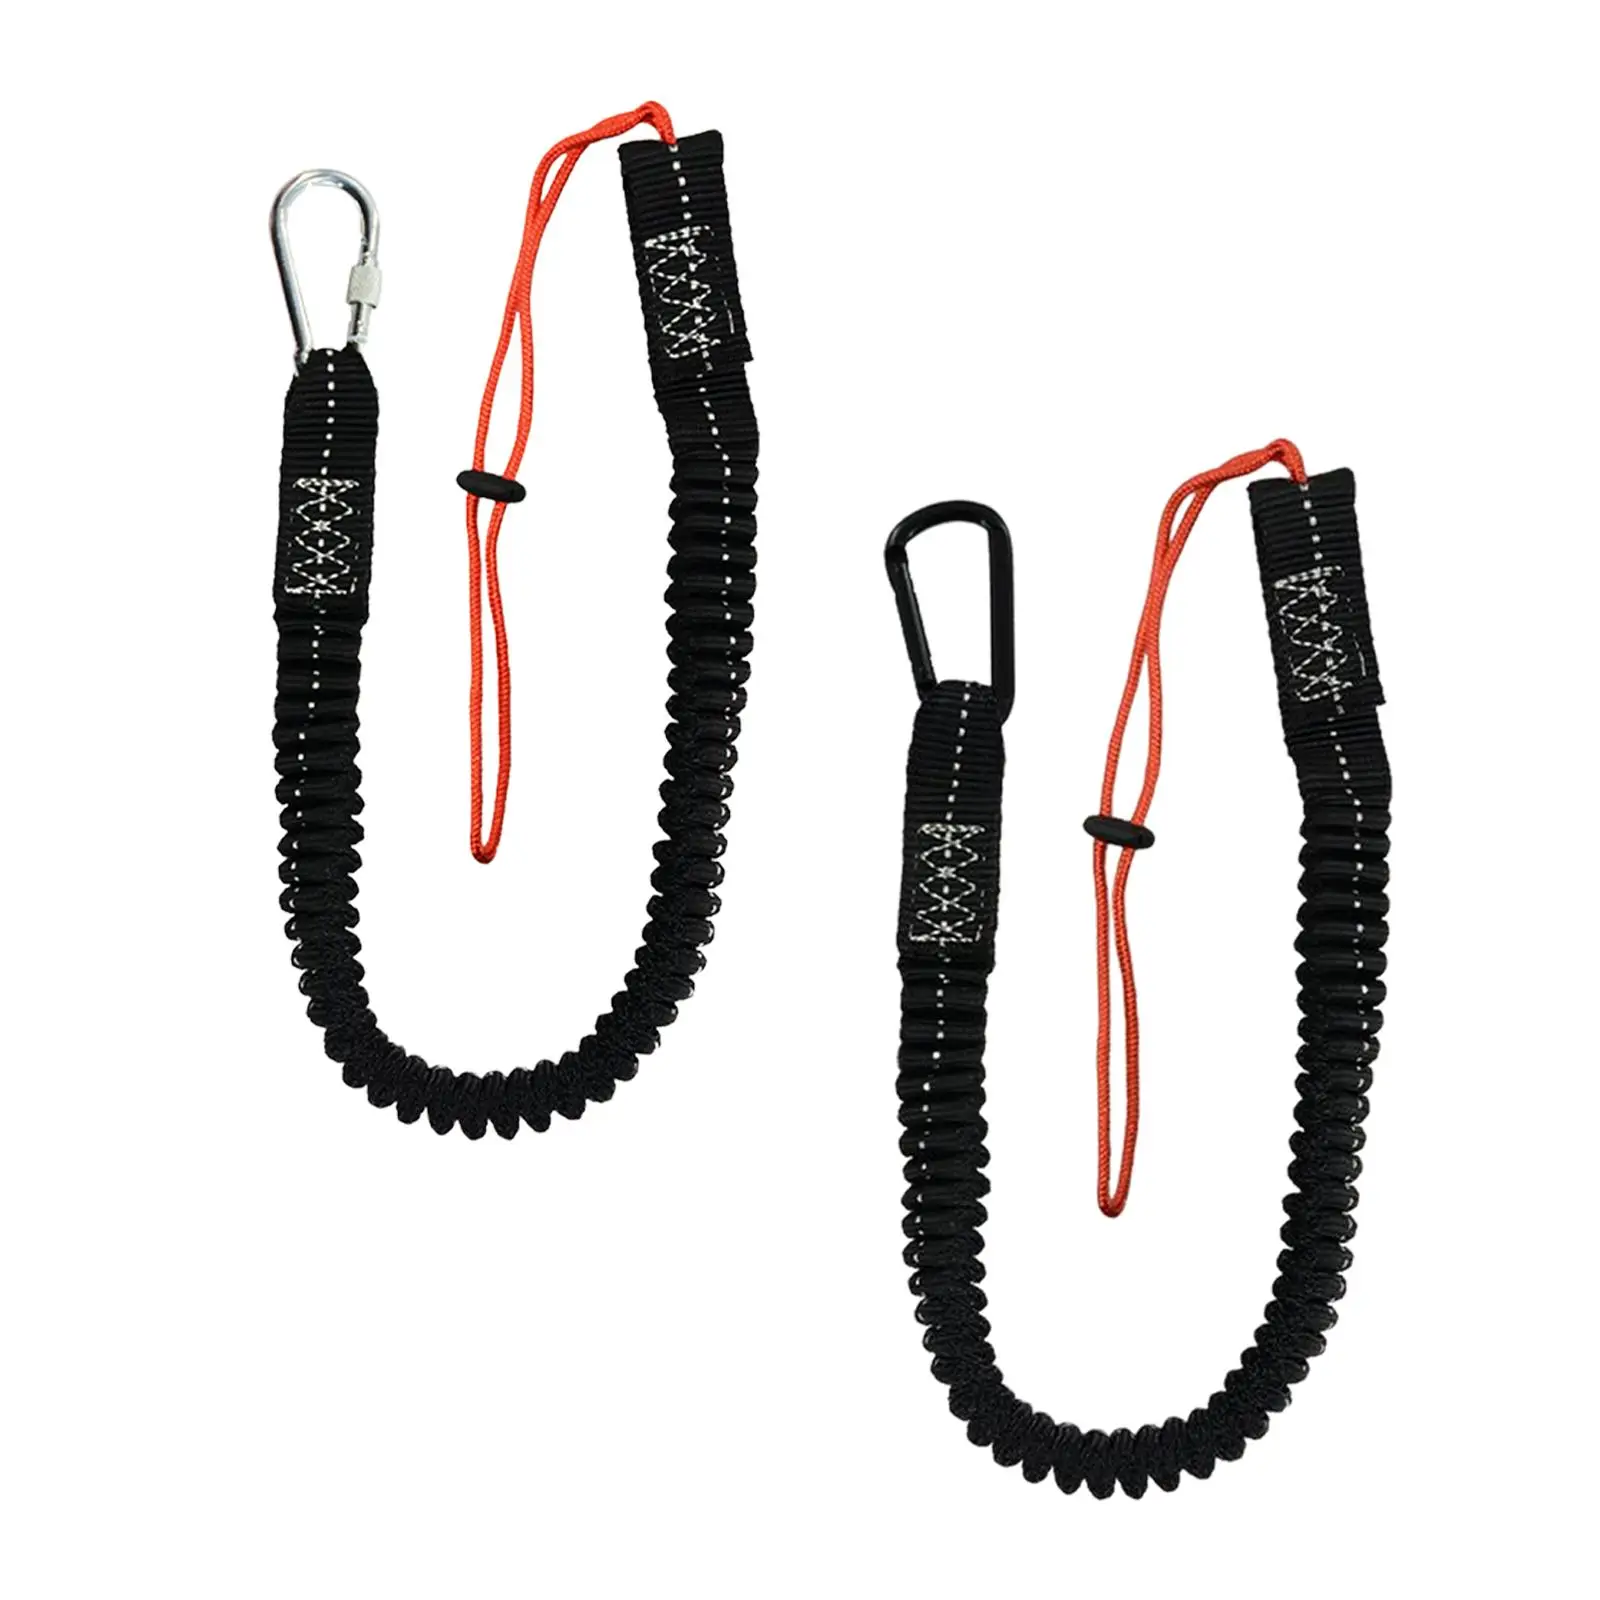  Clip Bungee Cord Adjustable Loop End Heavy Duty Fall Protection Retractable Shock Cord Stopper for Mountaineering Construction